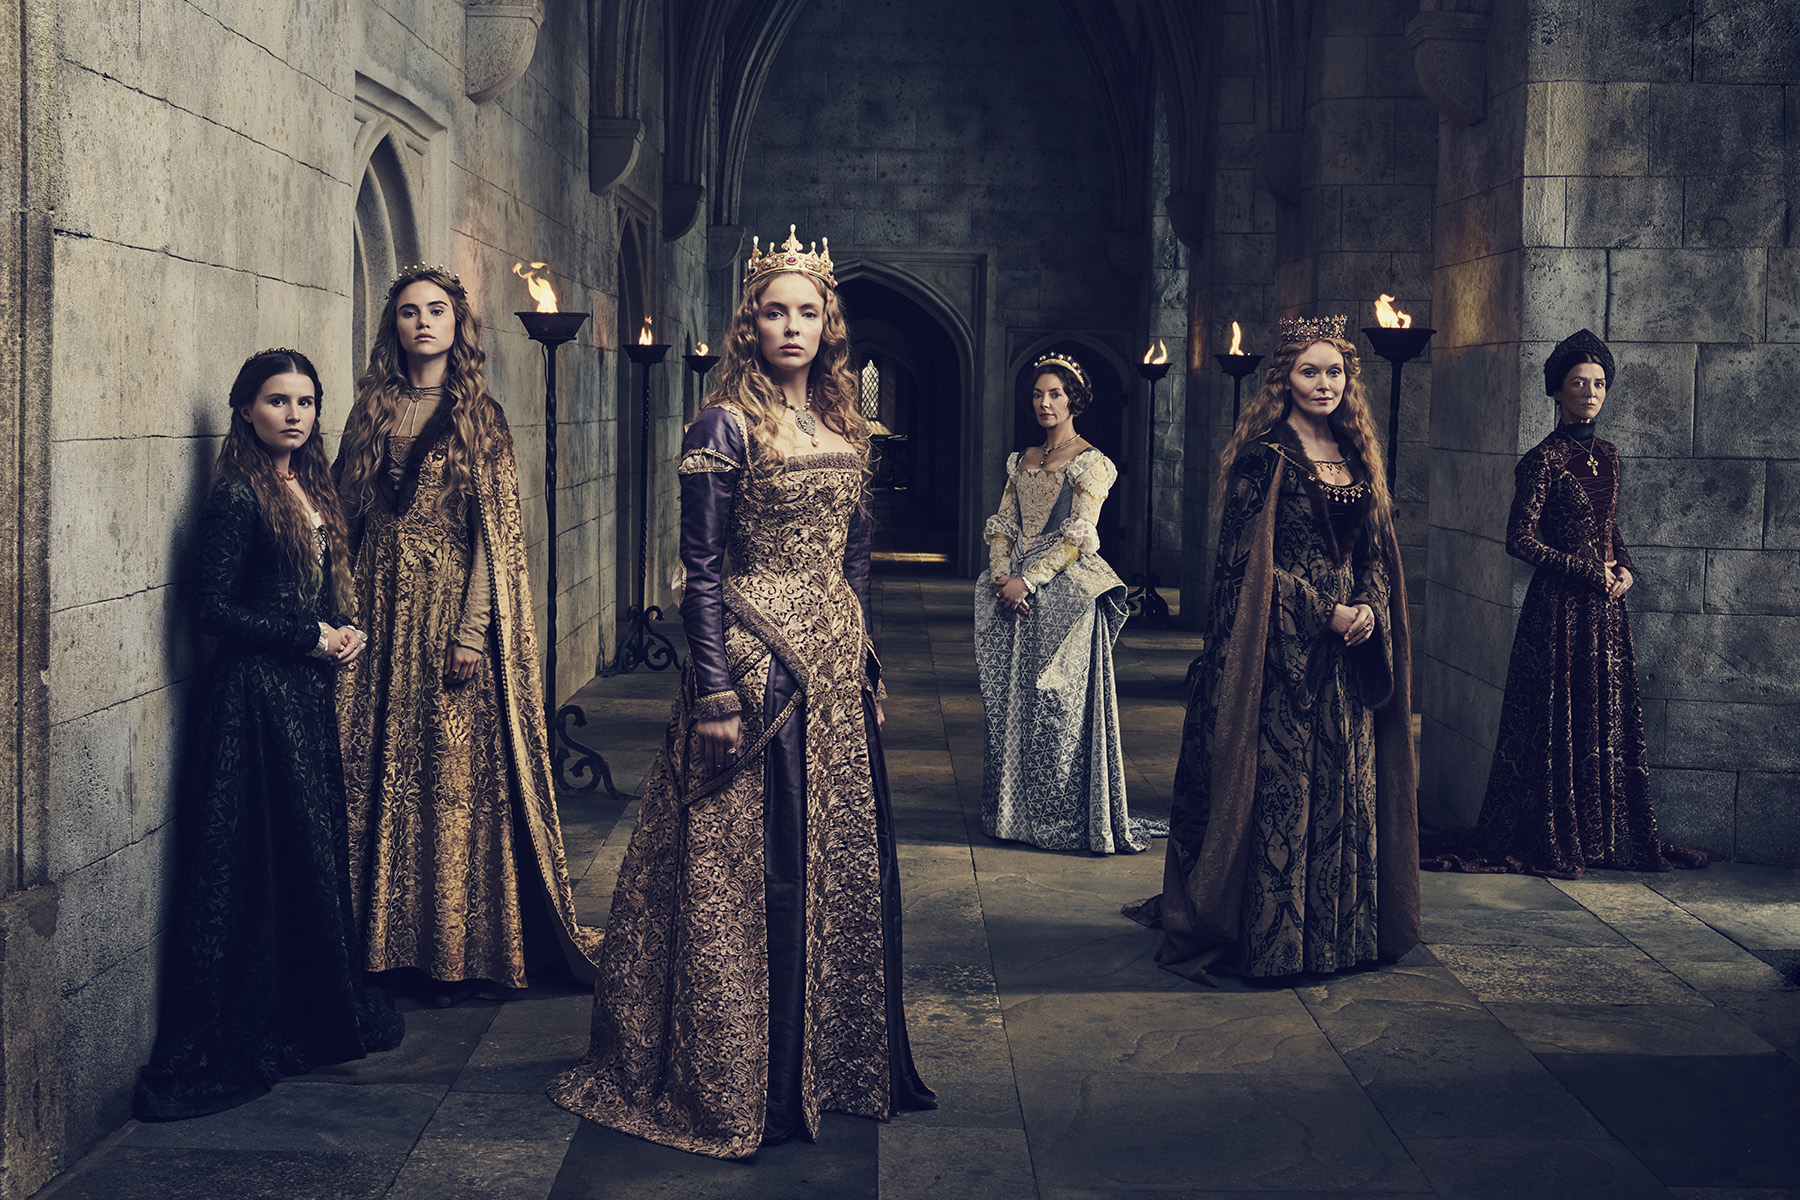   THE WHITE PRINCESS  ”A tapestry of backstage politics with some really marvelous performances”  The Wall Street Journal  